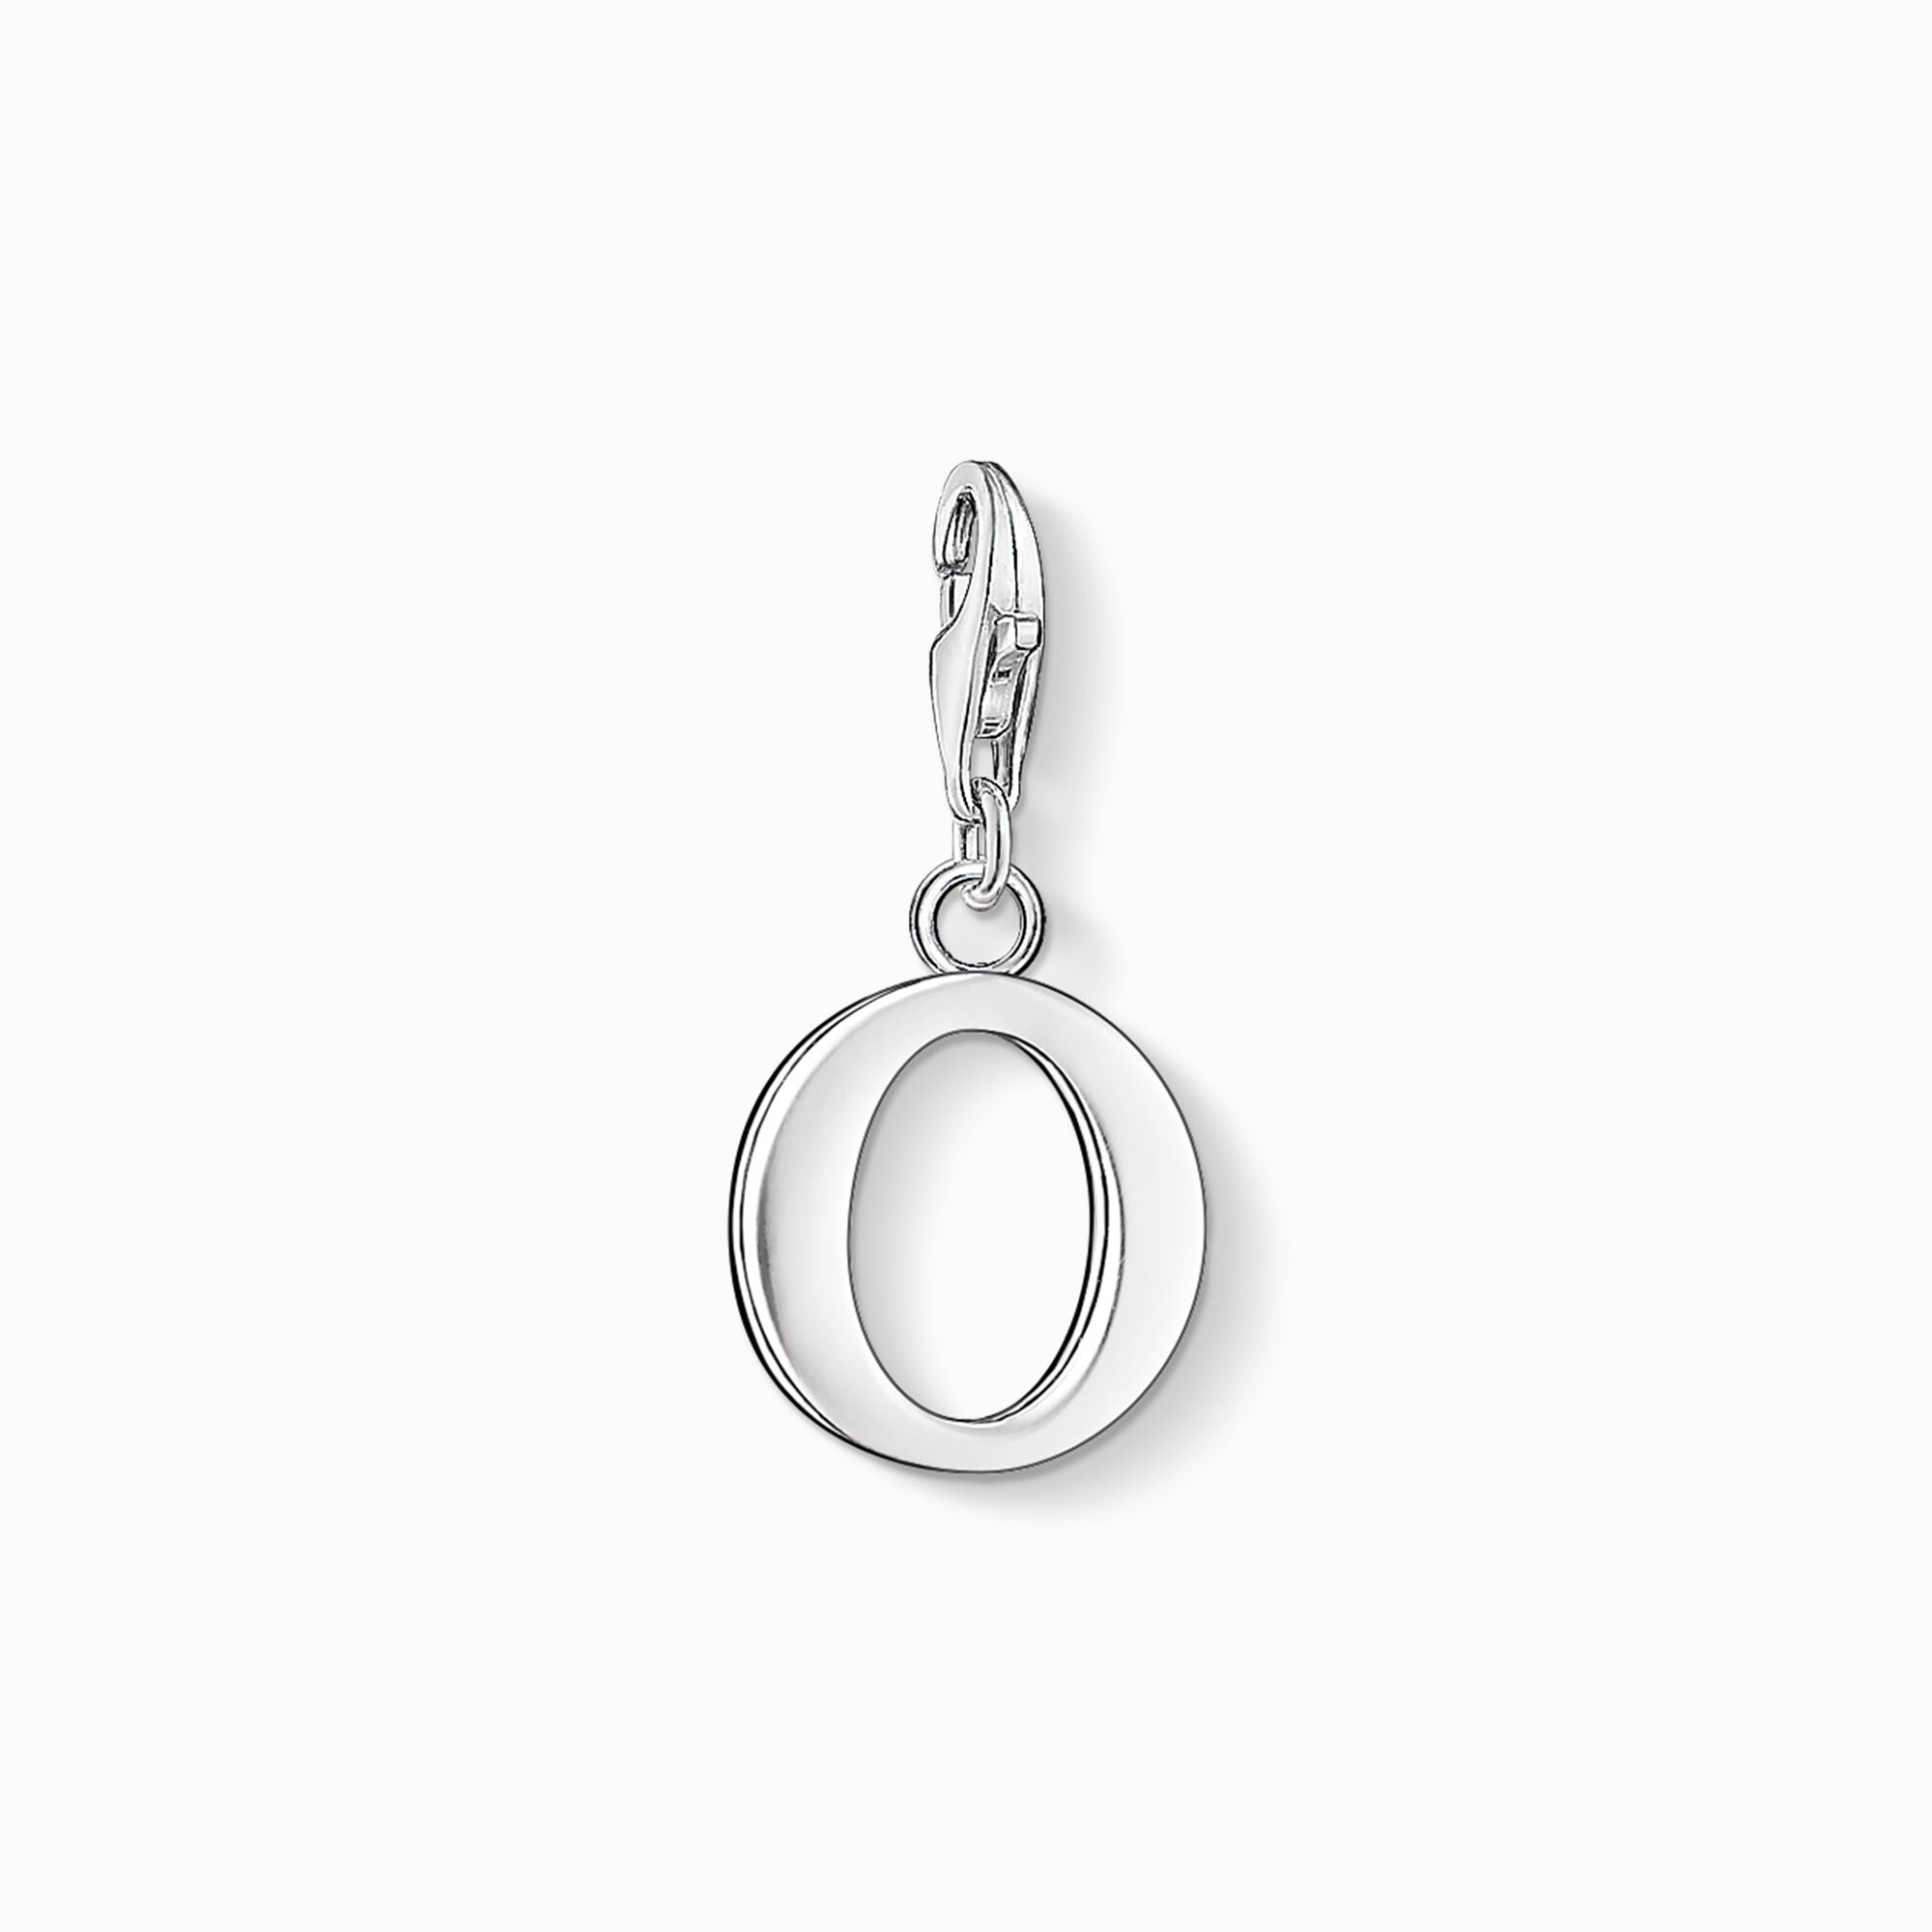 Charm pendant letter O from the Charm Club collection in the THOMAS SABO online store